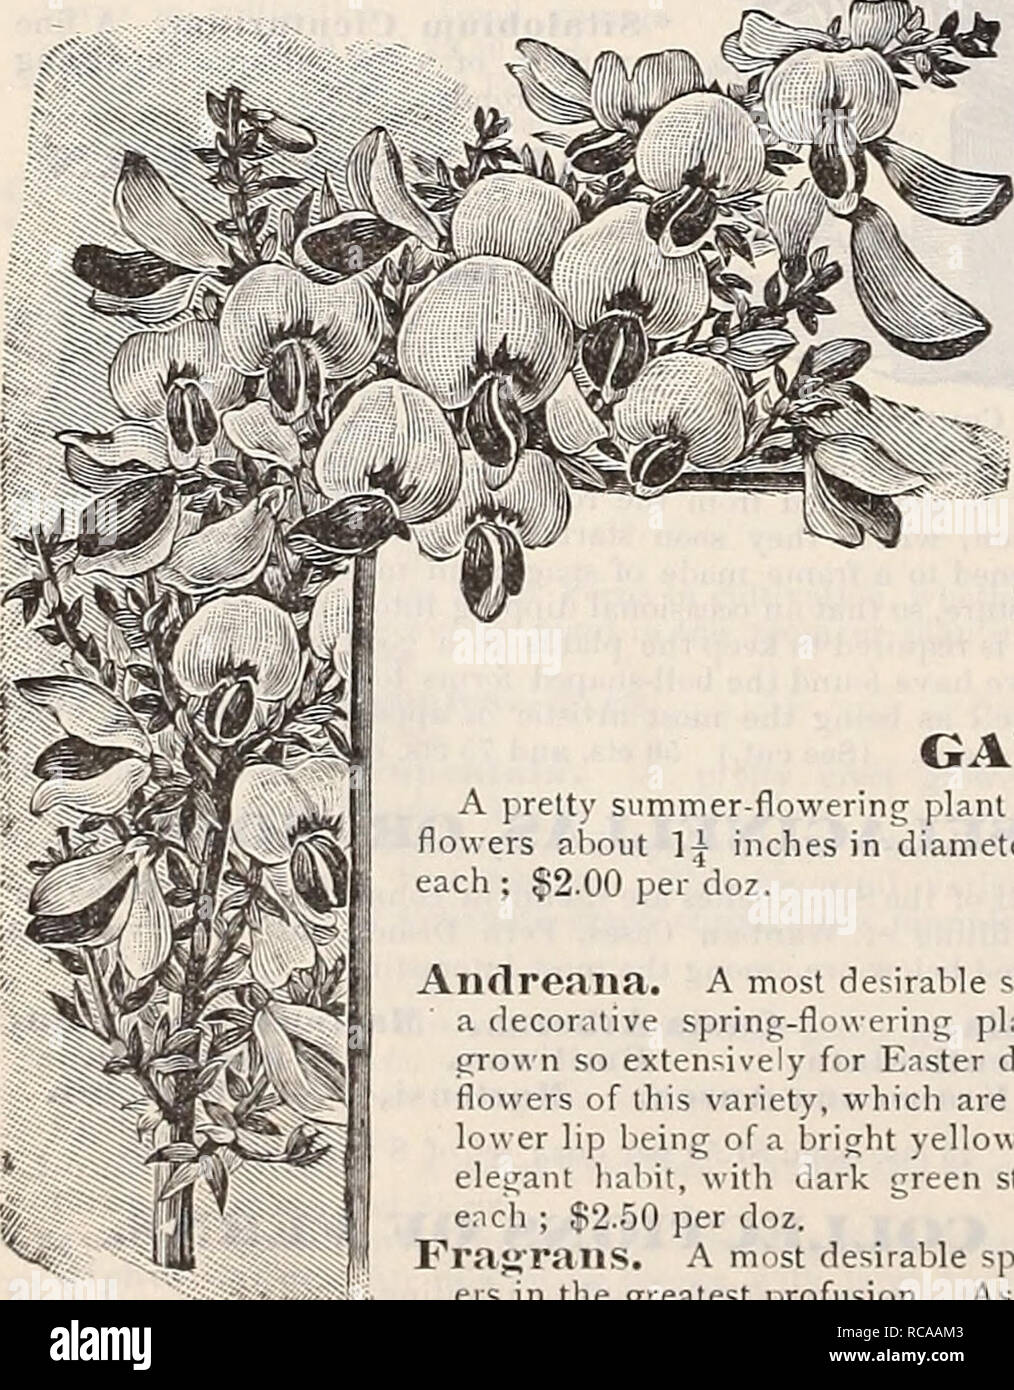 . Dreer's 1901 garden calendar. Seeds Catalogs; Nursery stock Catalogs; Gardening Equipment and supplies Catalogs; Flowers Seeds Catalogs; Vegetables Seeds Catalogs; Fruit Seeds Catalogs. Farfugium Grande Rubber Plant. FUCHSIAS. Well-known favorites for planting out in par- tially shaded positions during the summer, or- for â winter-flowering in the window or green- house. The following collection is a seleclioa of the finest of the new and old varieties. Varie- ties marked with an &quot;*&quot; are double-flowering. Genista Andr EAtlA. Arabella. White tube and sepals, rose corolla; early. *Be Stock Photo